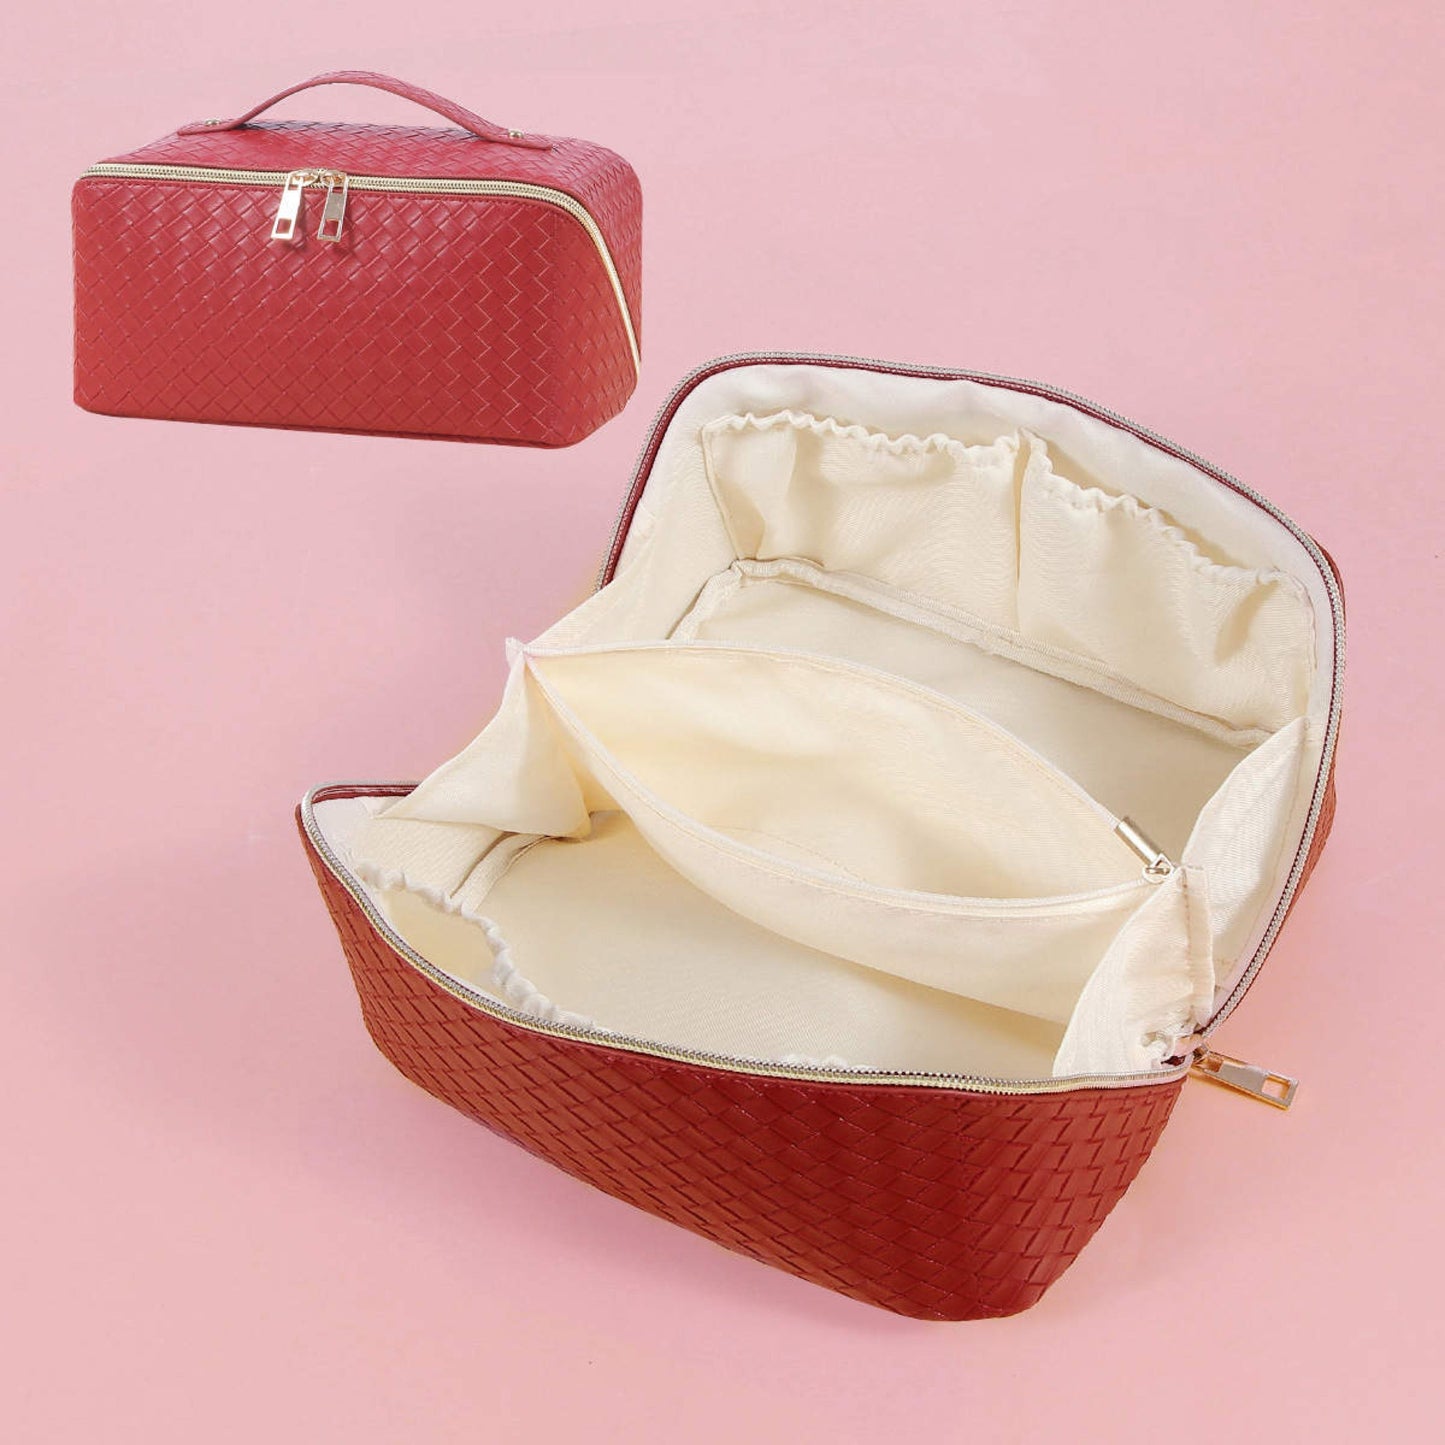 Oversized Lay Flat Cosmetic Bag - Woven Solids - PREORDER 5/14-5/16